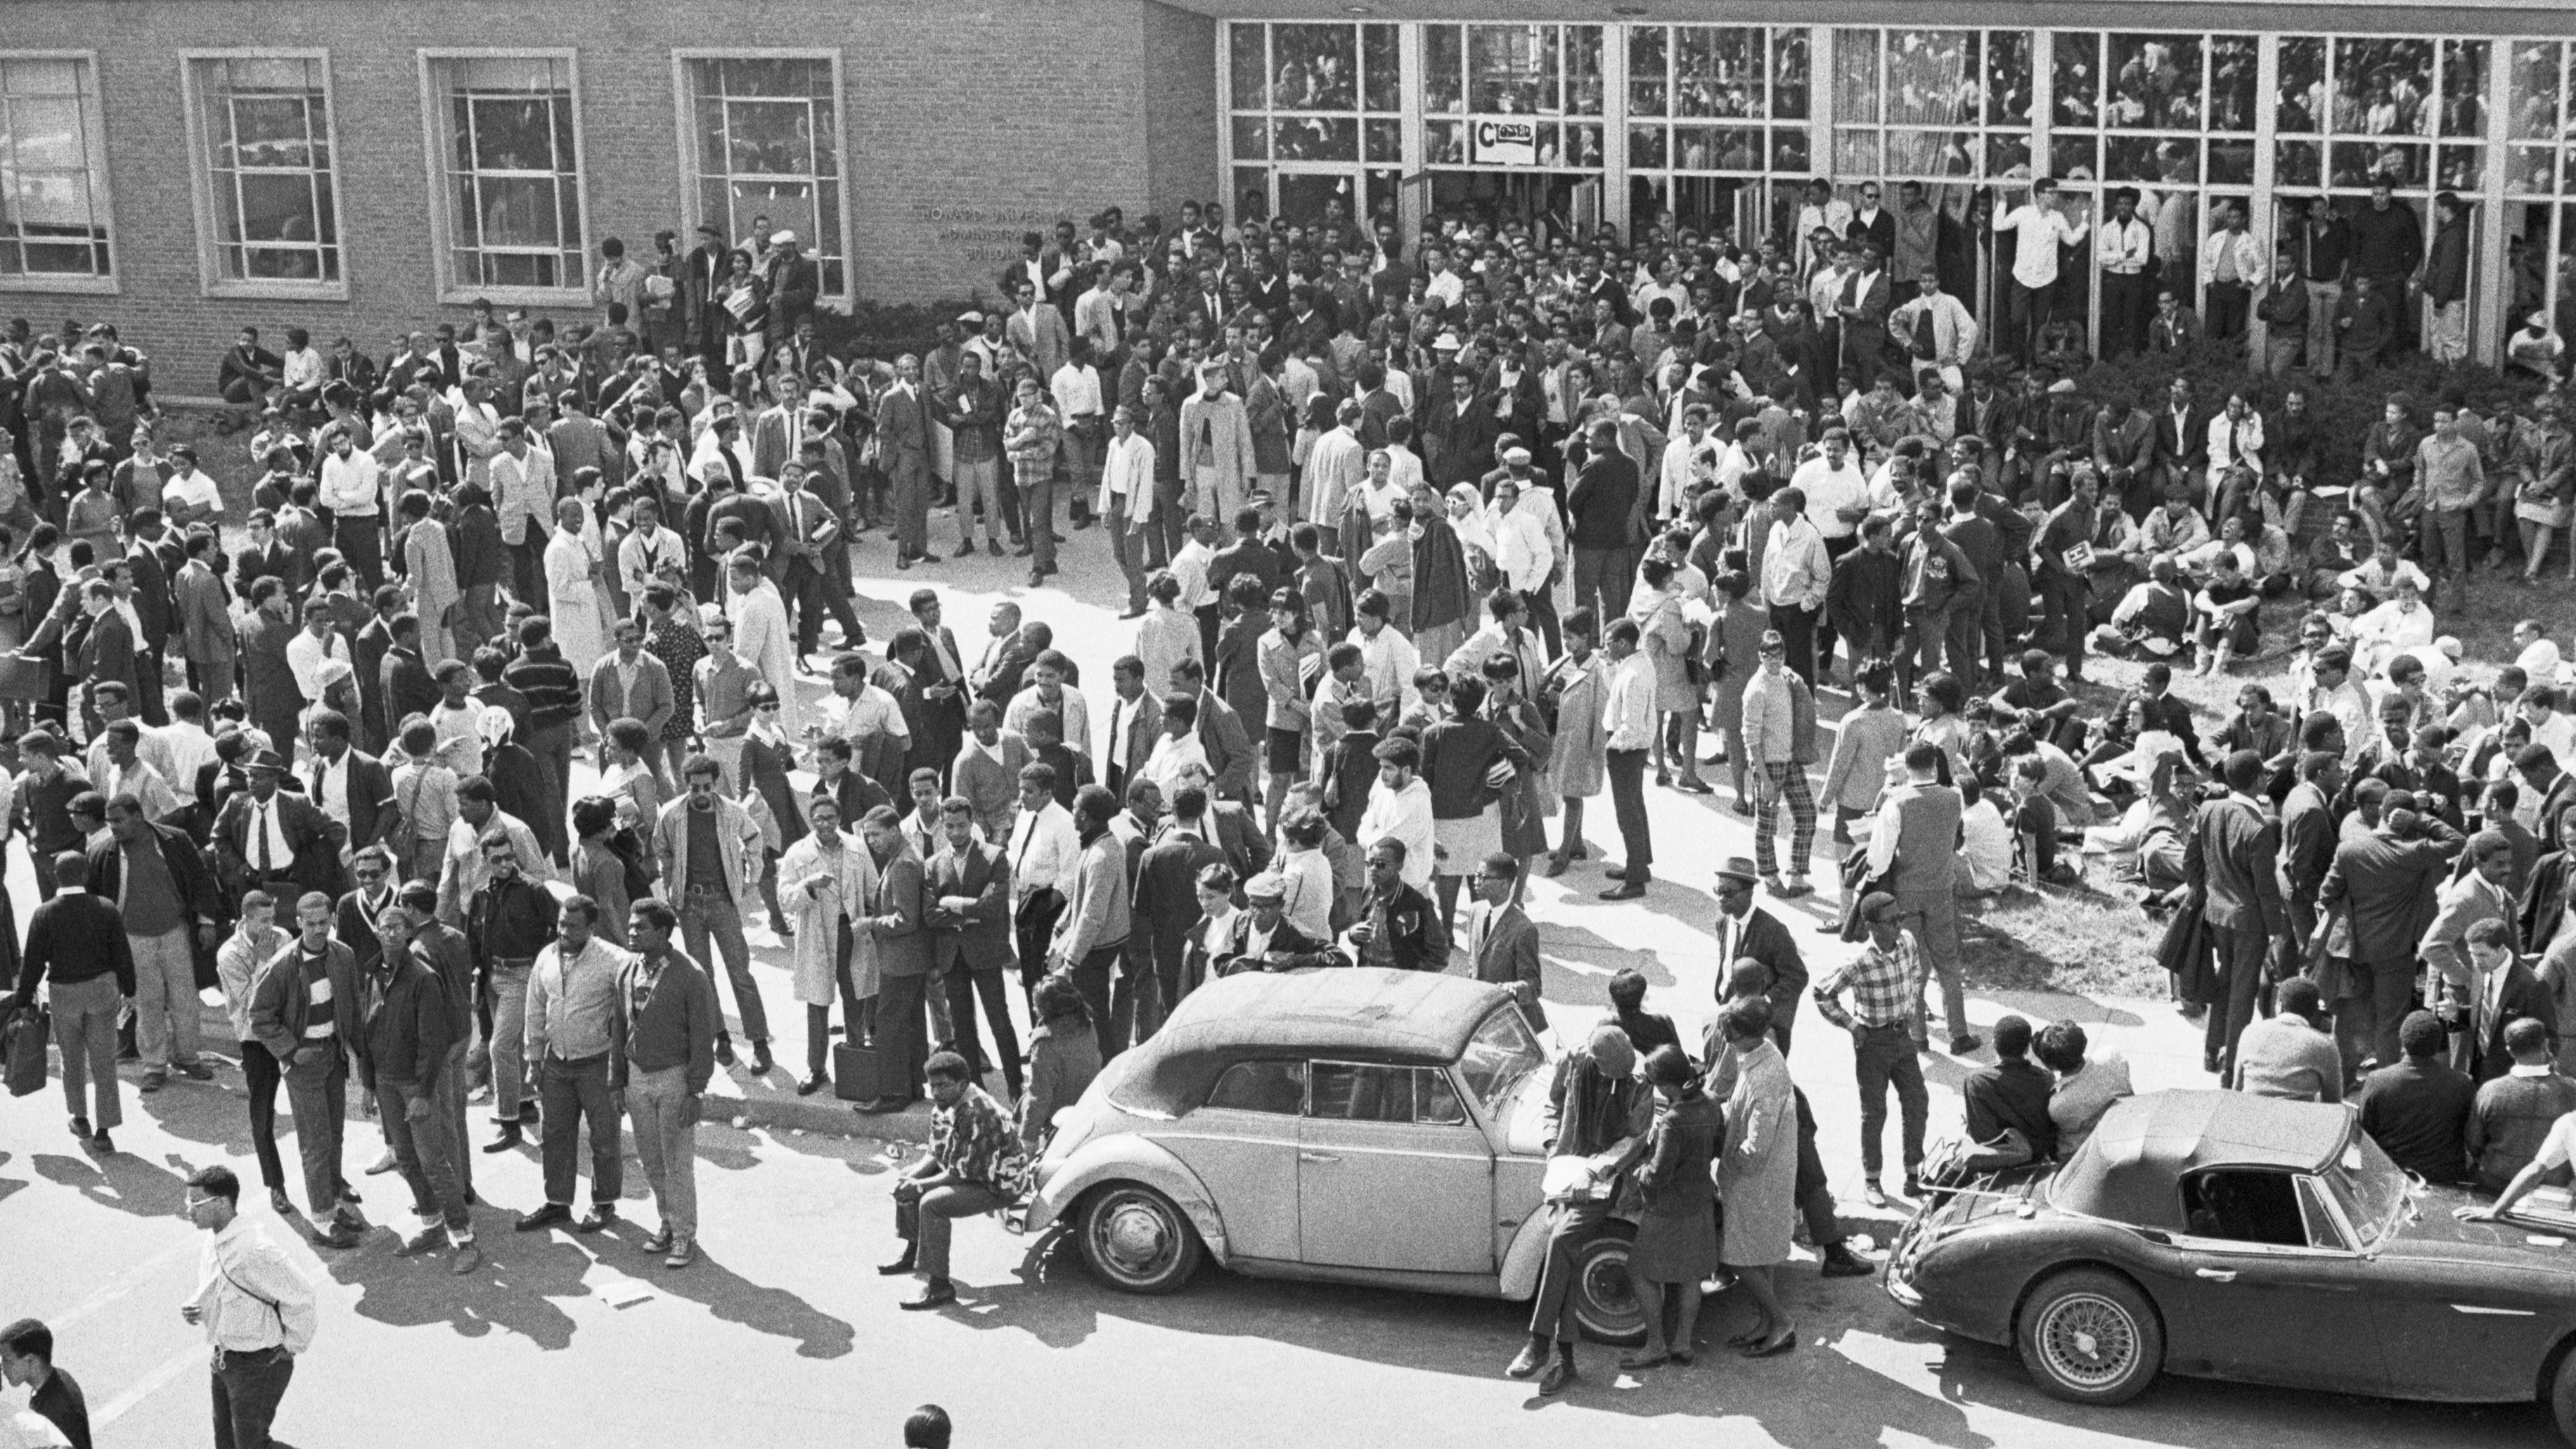 Howard University was forced to shut down operations for four days in 1968 after over 1,000 students participated in a sit-in. 